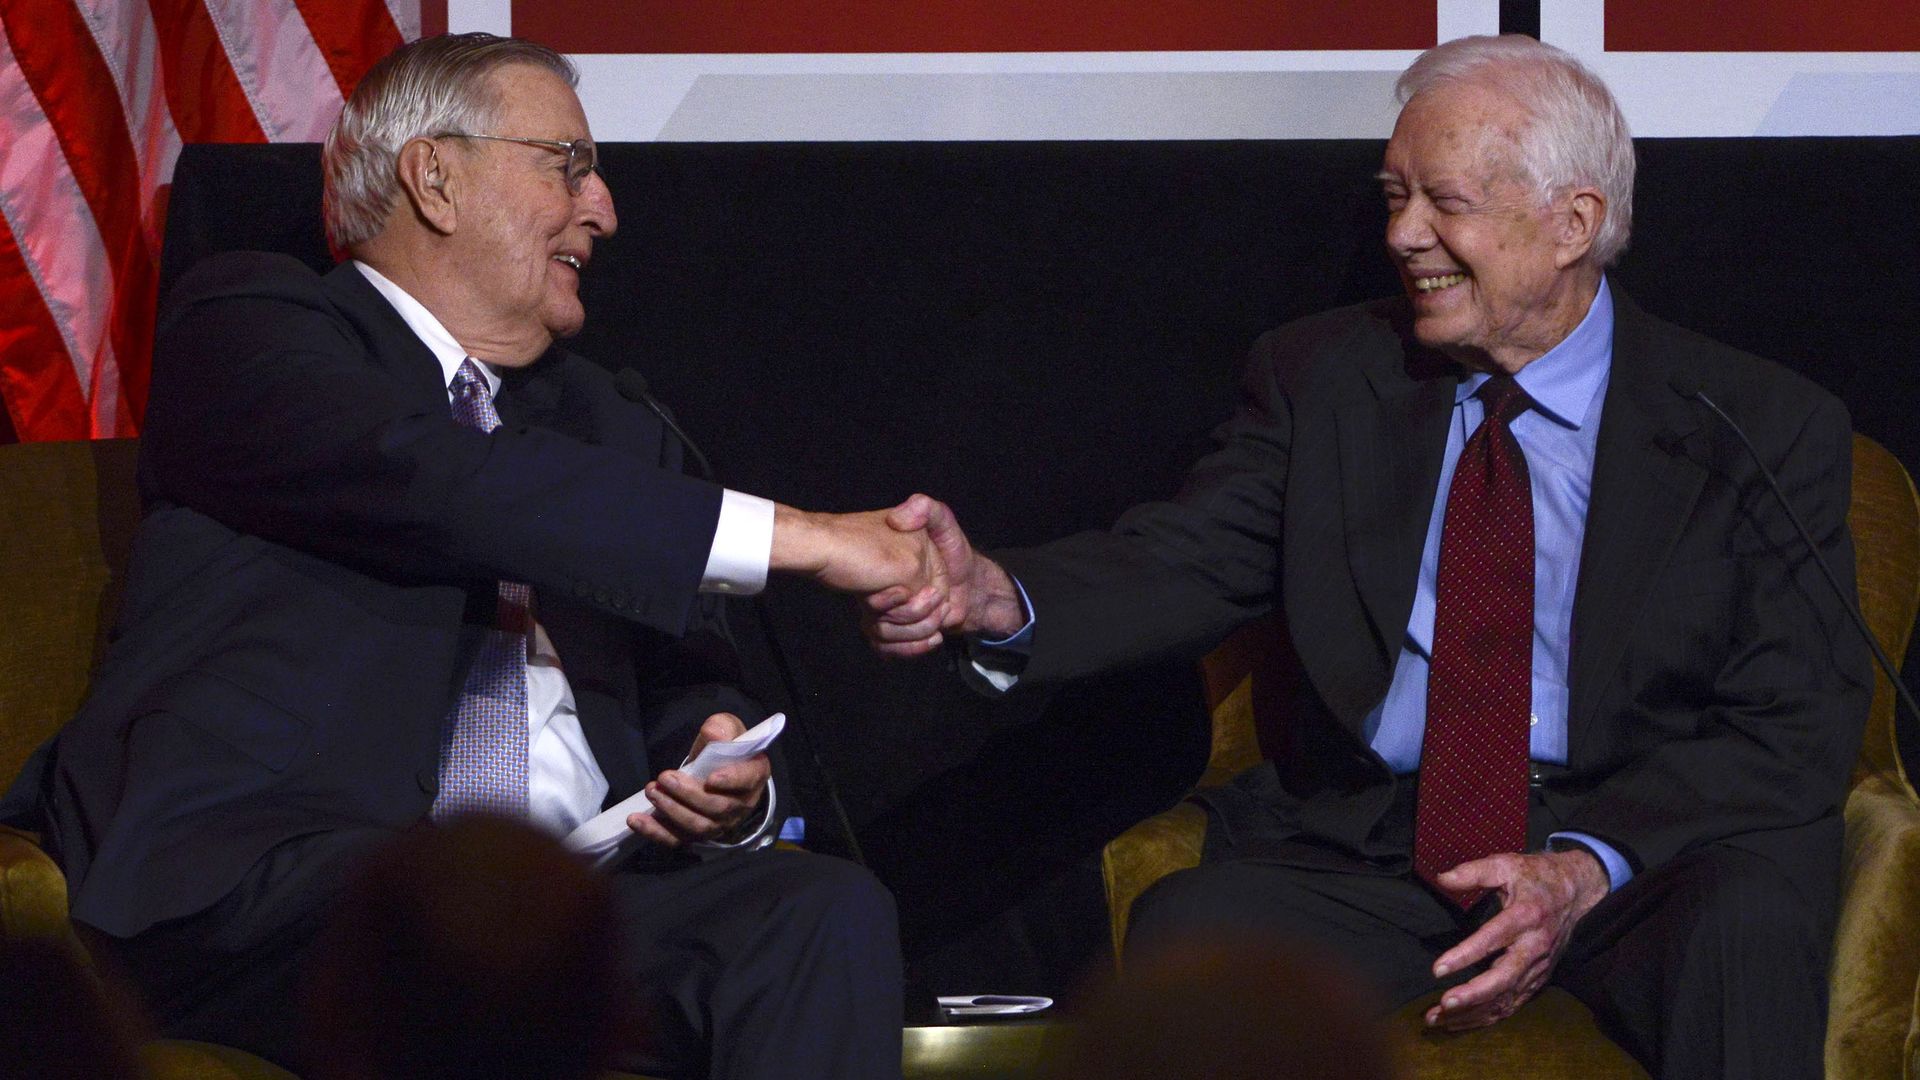  Former Vice President Walter Mondale speaks with President Jimmy Carter at a gala in honor of Walter Mondale at the Four Seasons Hotel on October 20, 2015